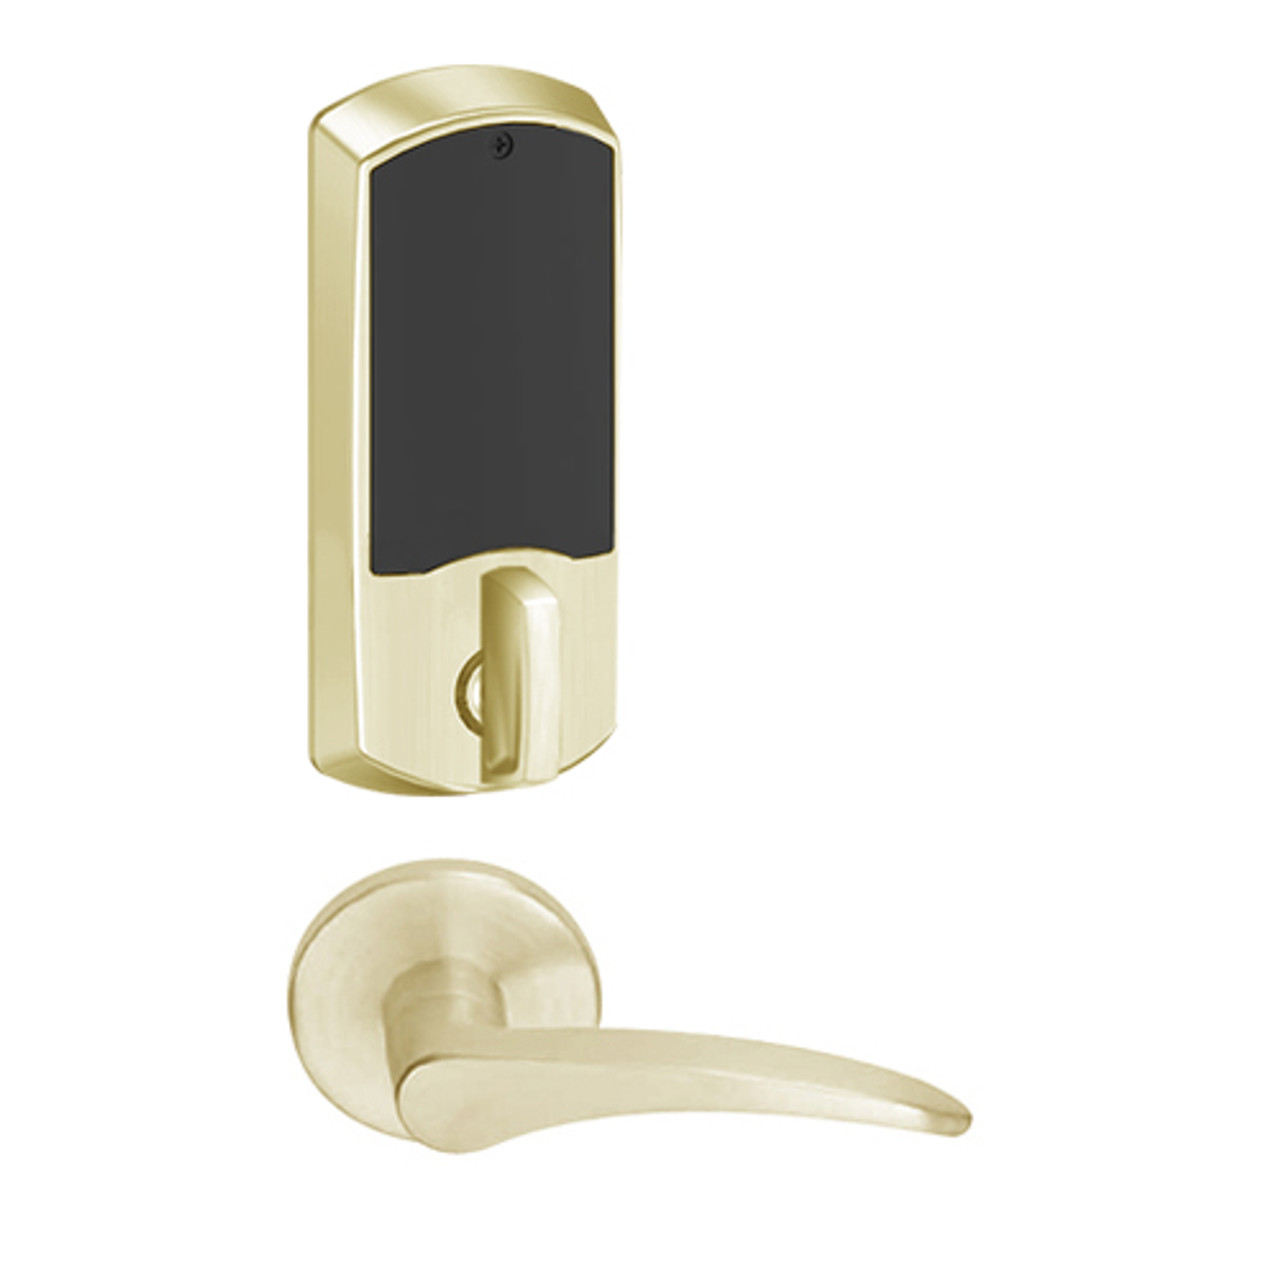 LEMD-GRW-BD-12-606-00C-LH Schlage Privacy/Apartment Wireless Greenwich Mortise Deadbolt Lock with LED and 12 Lever Prepped for SFIC in Satin Brass